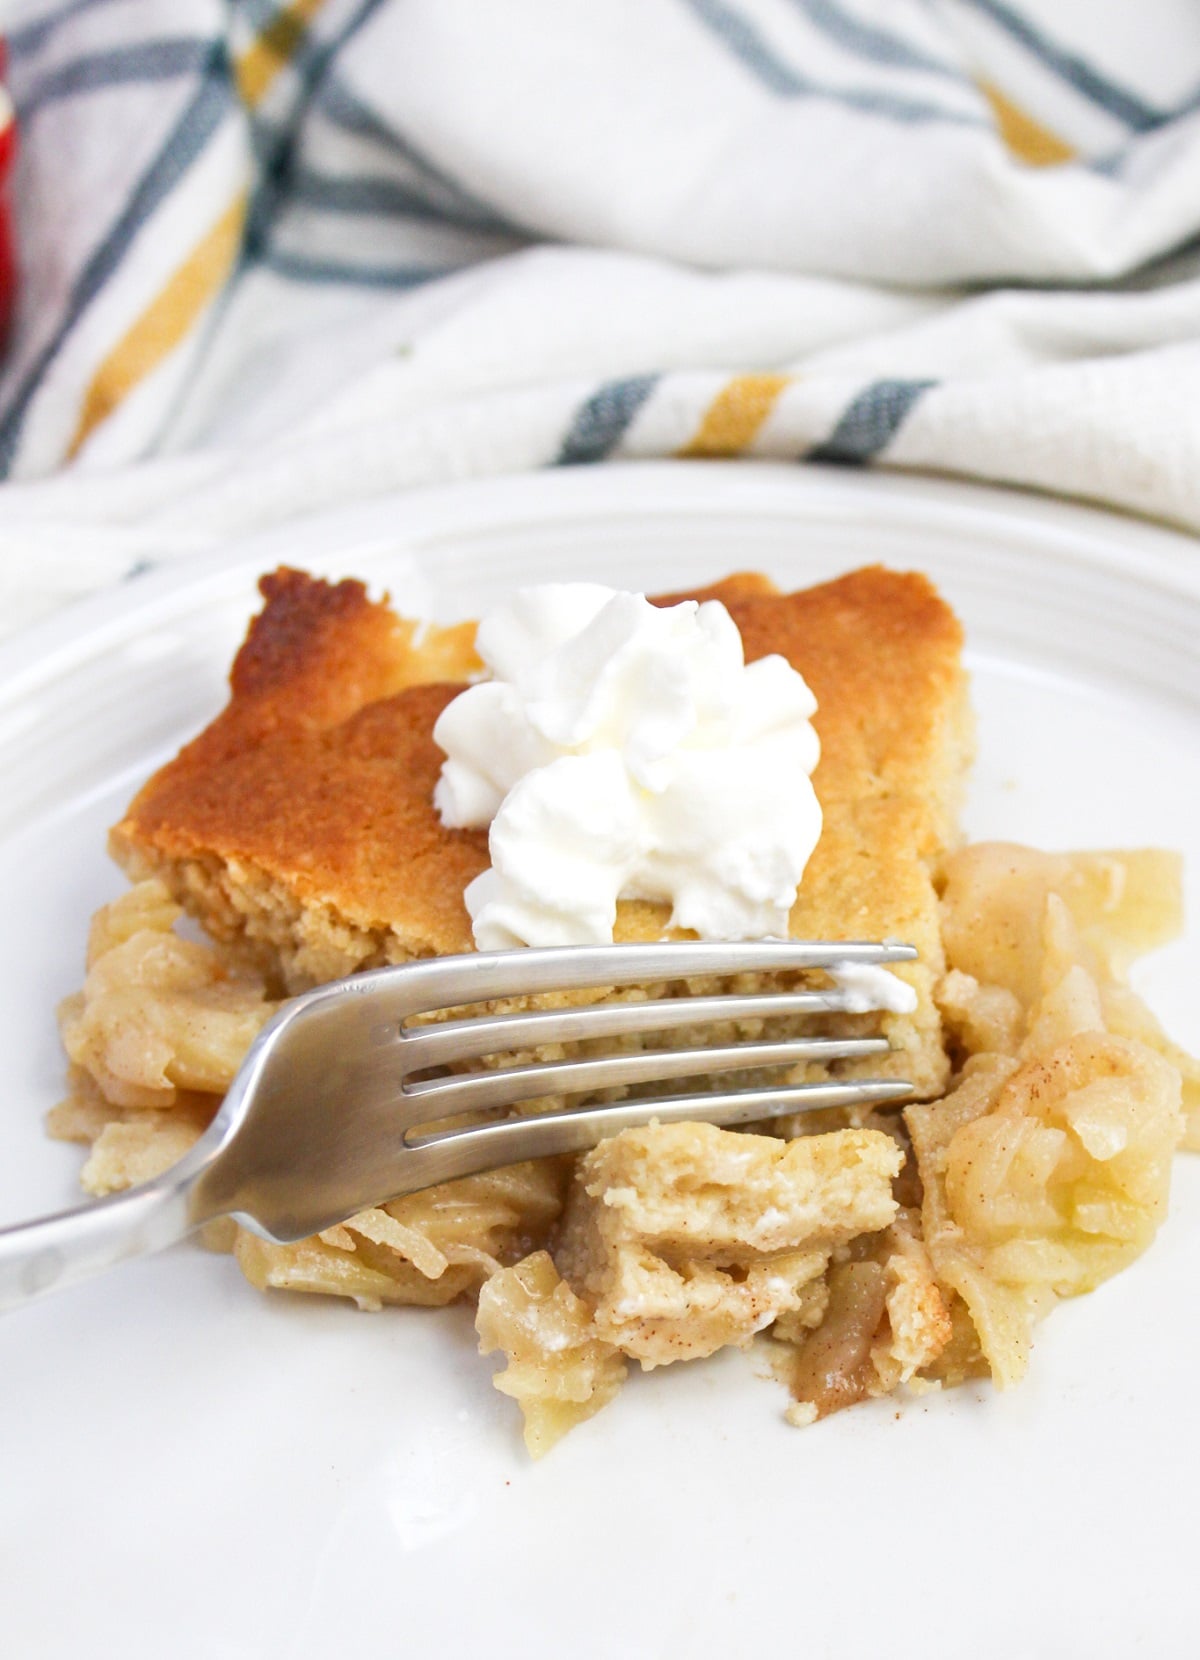 Swedish apple pie on a plate with a fork